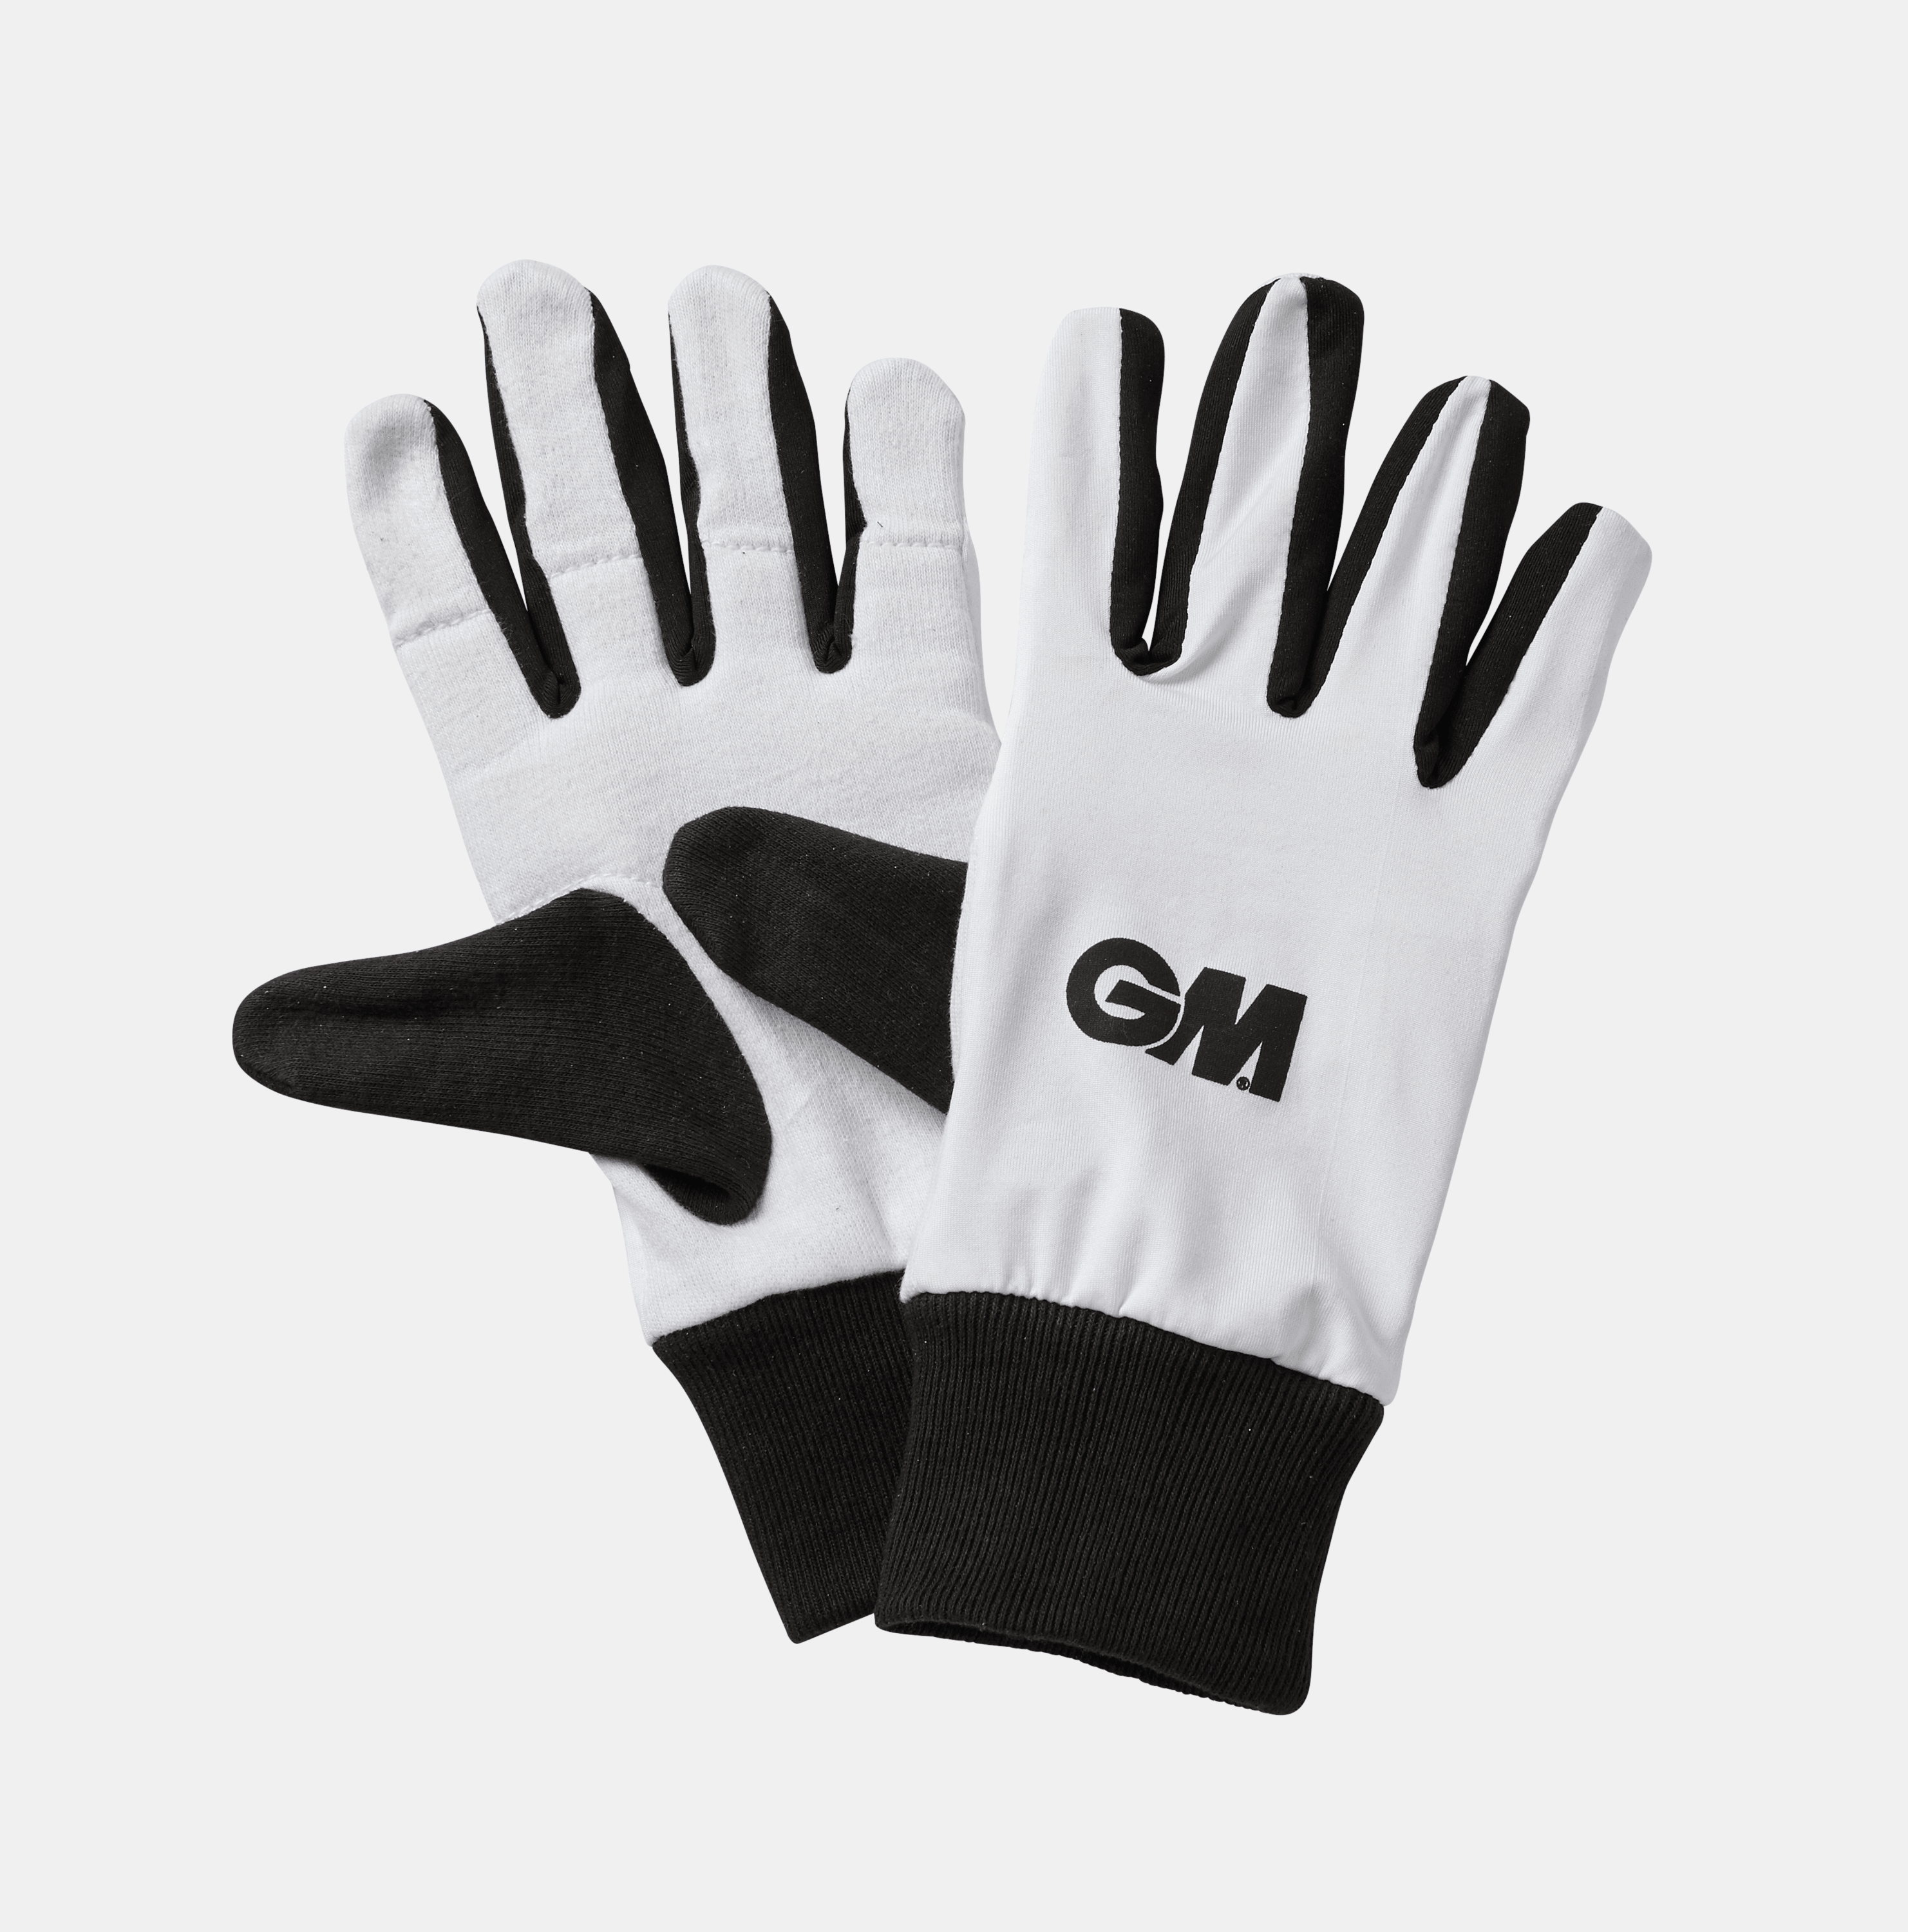 GM Padded Cotton INNER Wicket Keeping Gloves - YOUTH - AT Sports